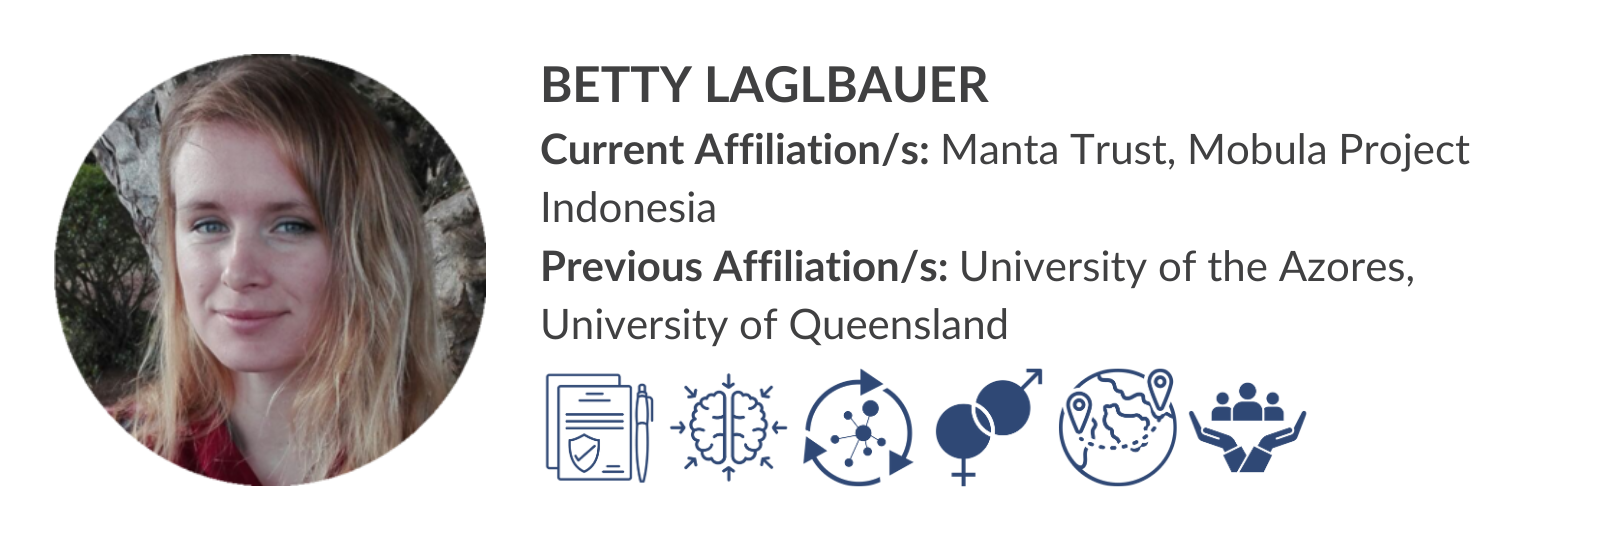 Betty Laglbauer.png